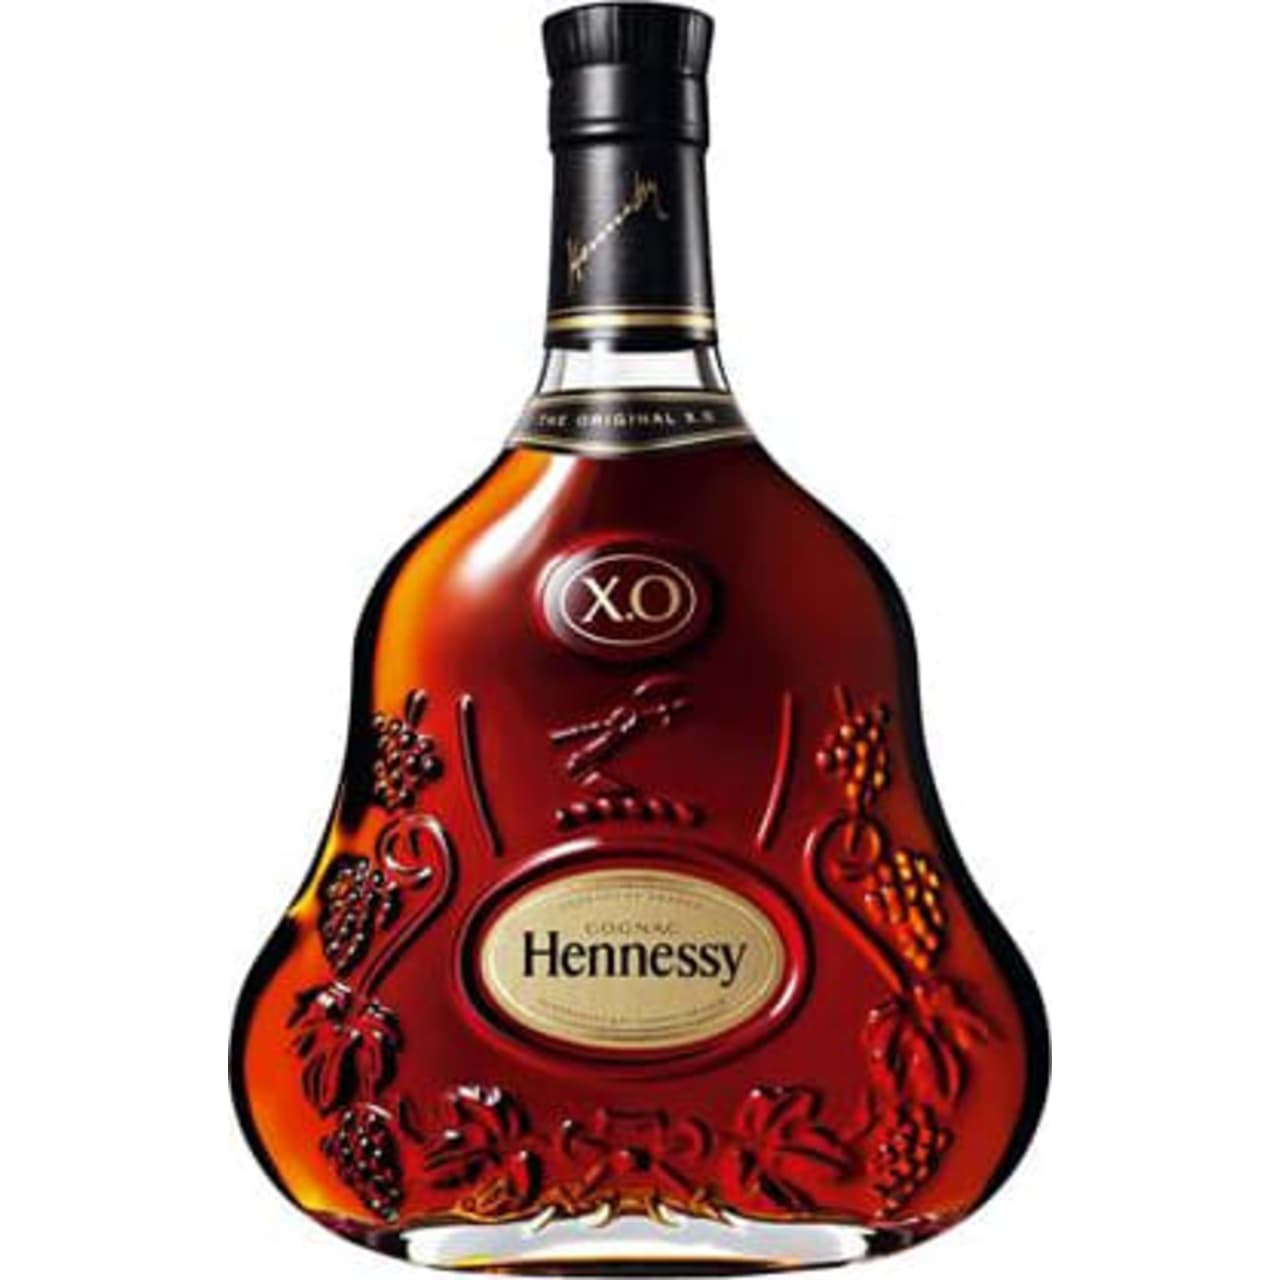 Rich, full-bodied and complex, Hennessy X.O combines the spicy aromas of oak and leather with the sweeter essences of flowers and ripe fruit. Well-balanced, the initial flourish is dominated by the powerful suggestion of pepper and rancio, which testify to the long years it has spent being aged. Complex and long-lasting.